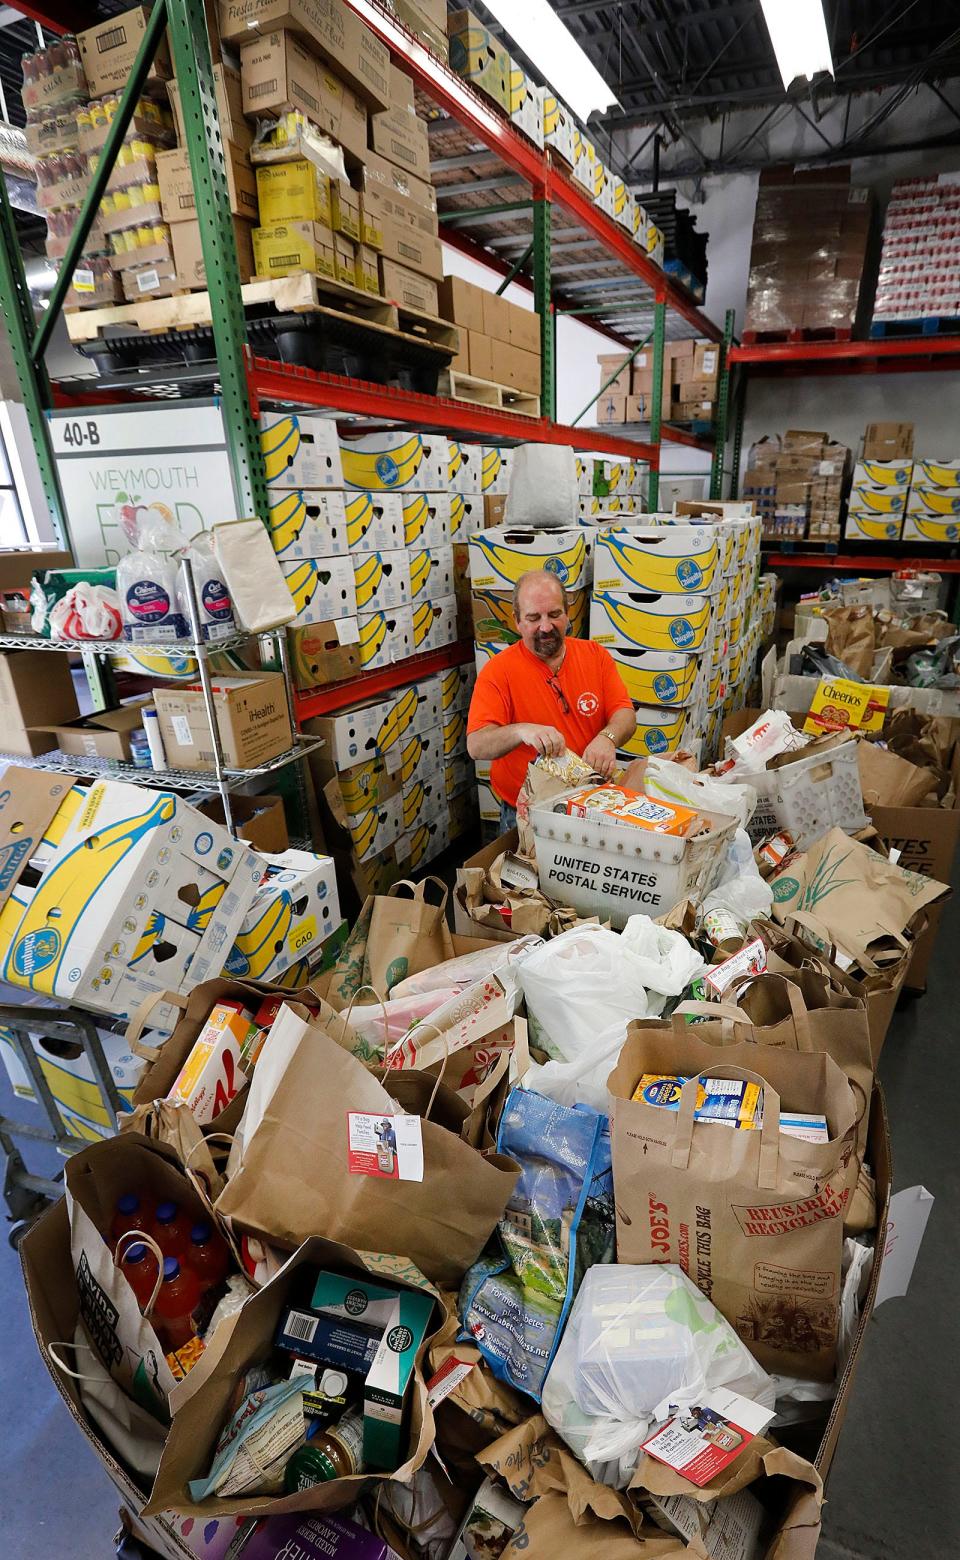 Weymouth/Rockland Food Pantry staff member Steve Manupelli,  on Tuesday, May 17, 2022, sorts food collected by United States Postal Service letter carriers in Weymouth.